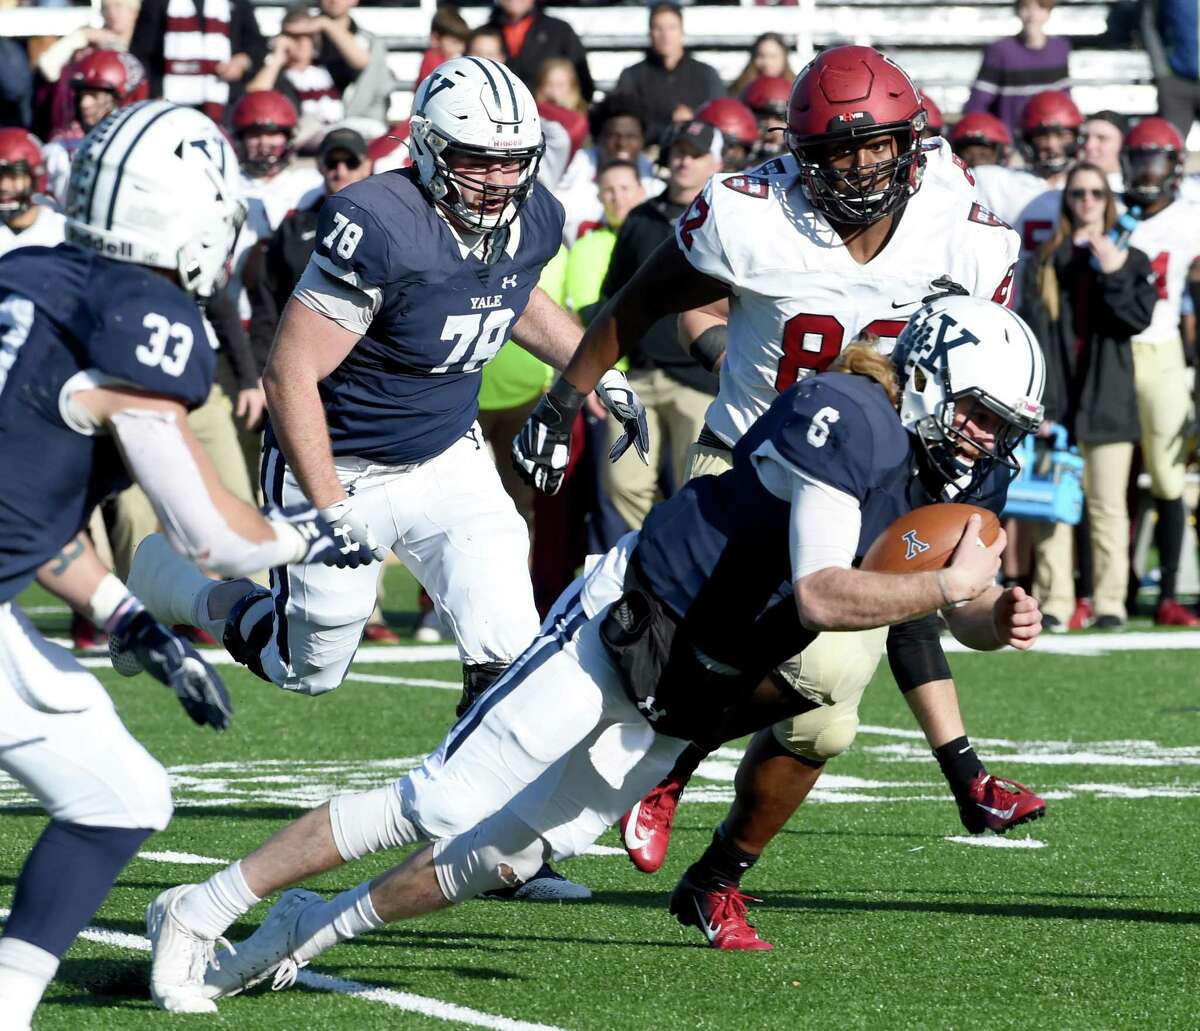 Yale quarterback Kurt Rawlings attempts to get a first down against Harvard in the first half Saturday in New Haven.